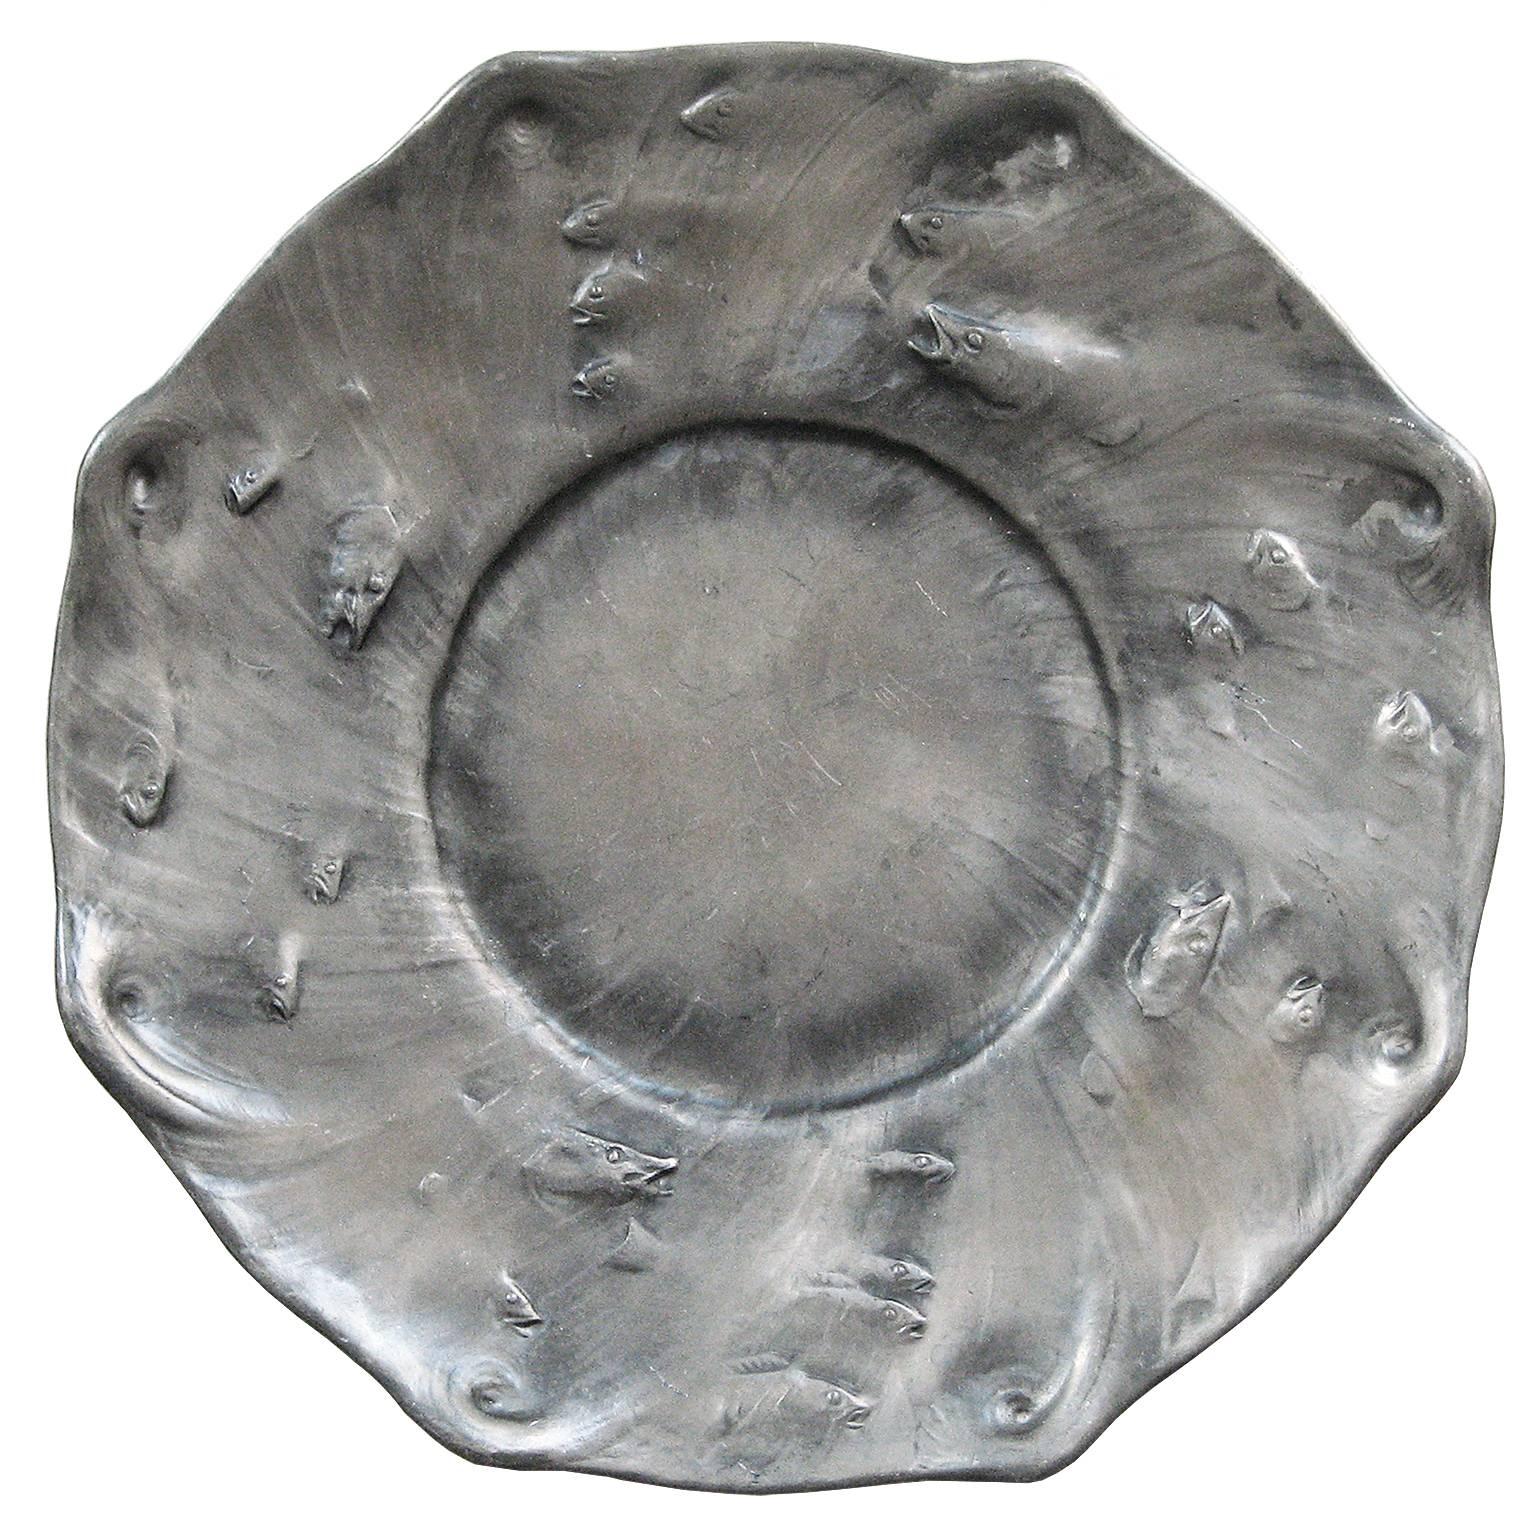 Swedish Art Nouveau Pewter Charger by Olof Ahlberg, for Schreuder & Olsson